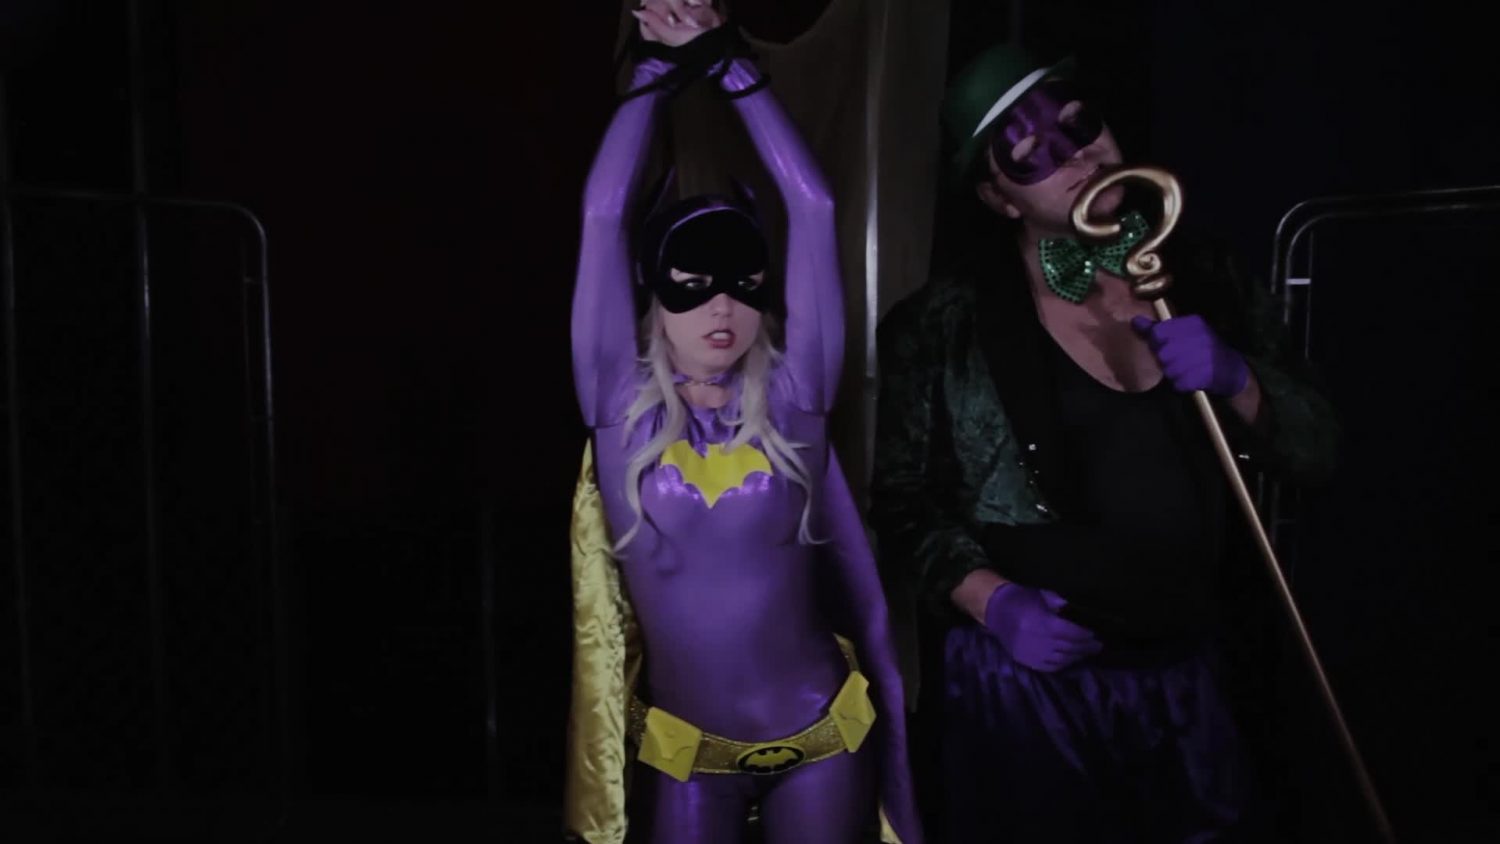 Lexi Belle Tbfe Sex - Lexi Belle Batgirl - Cosplay Porn Videos with Women Warriors, Superheroine  Sexy Girls and other costume roleplay characters